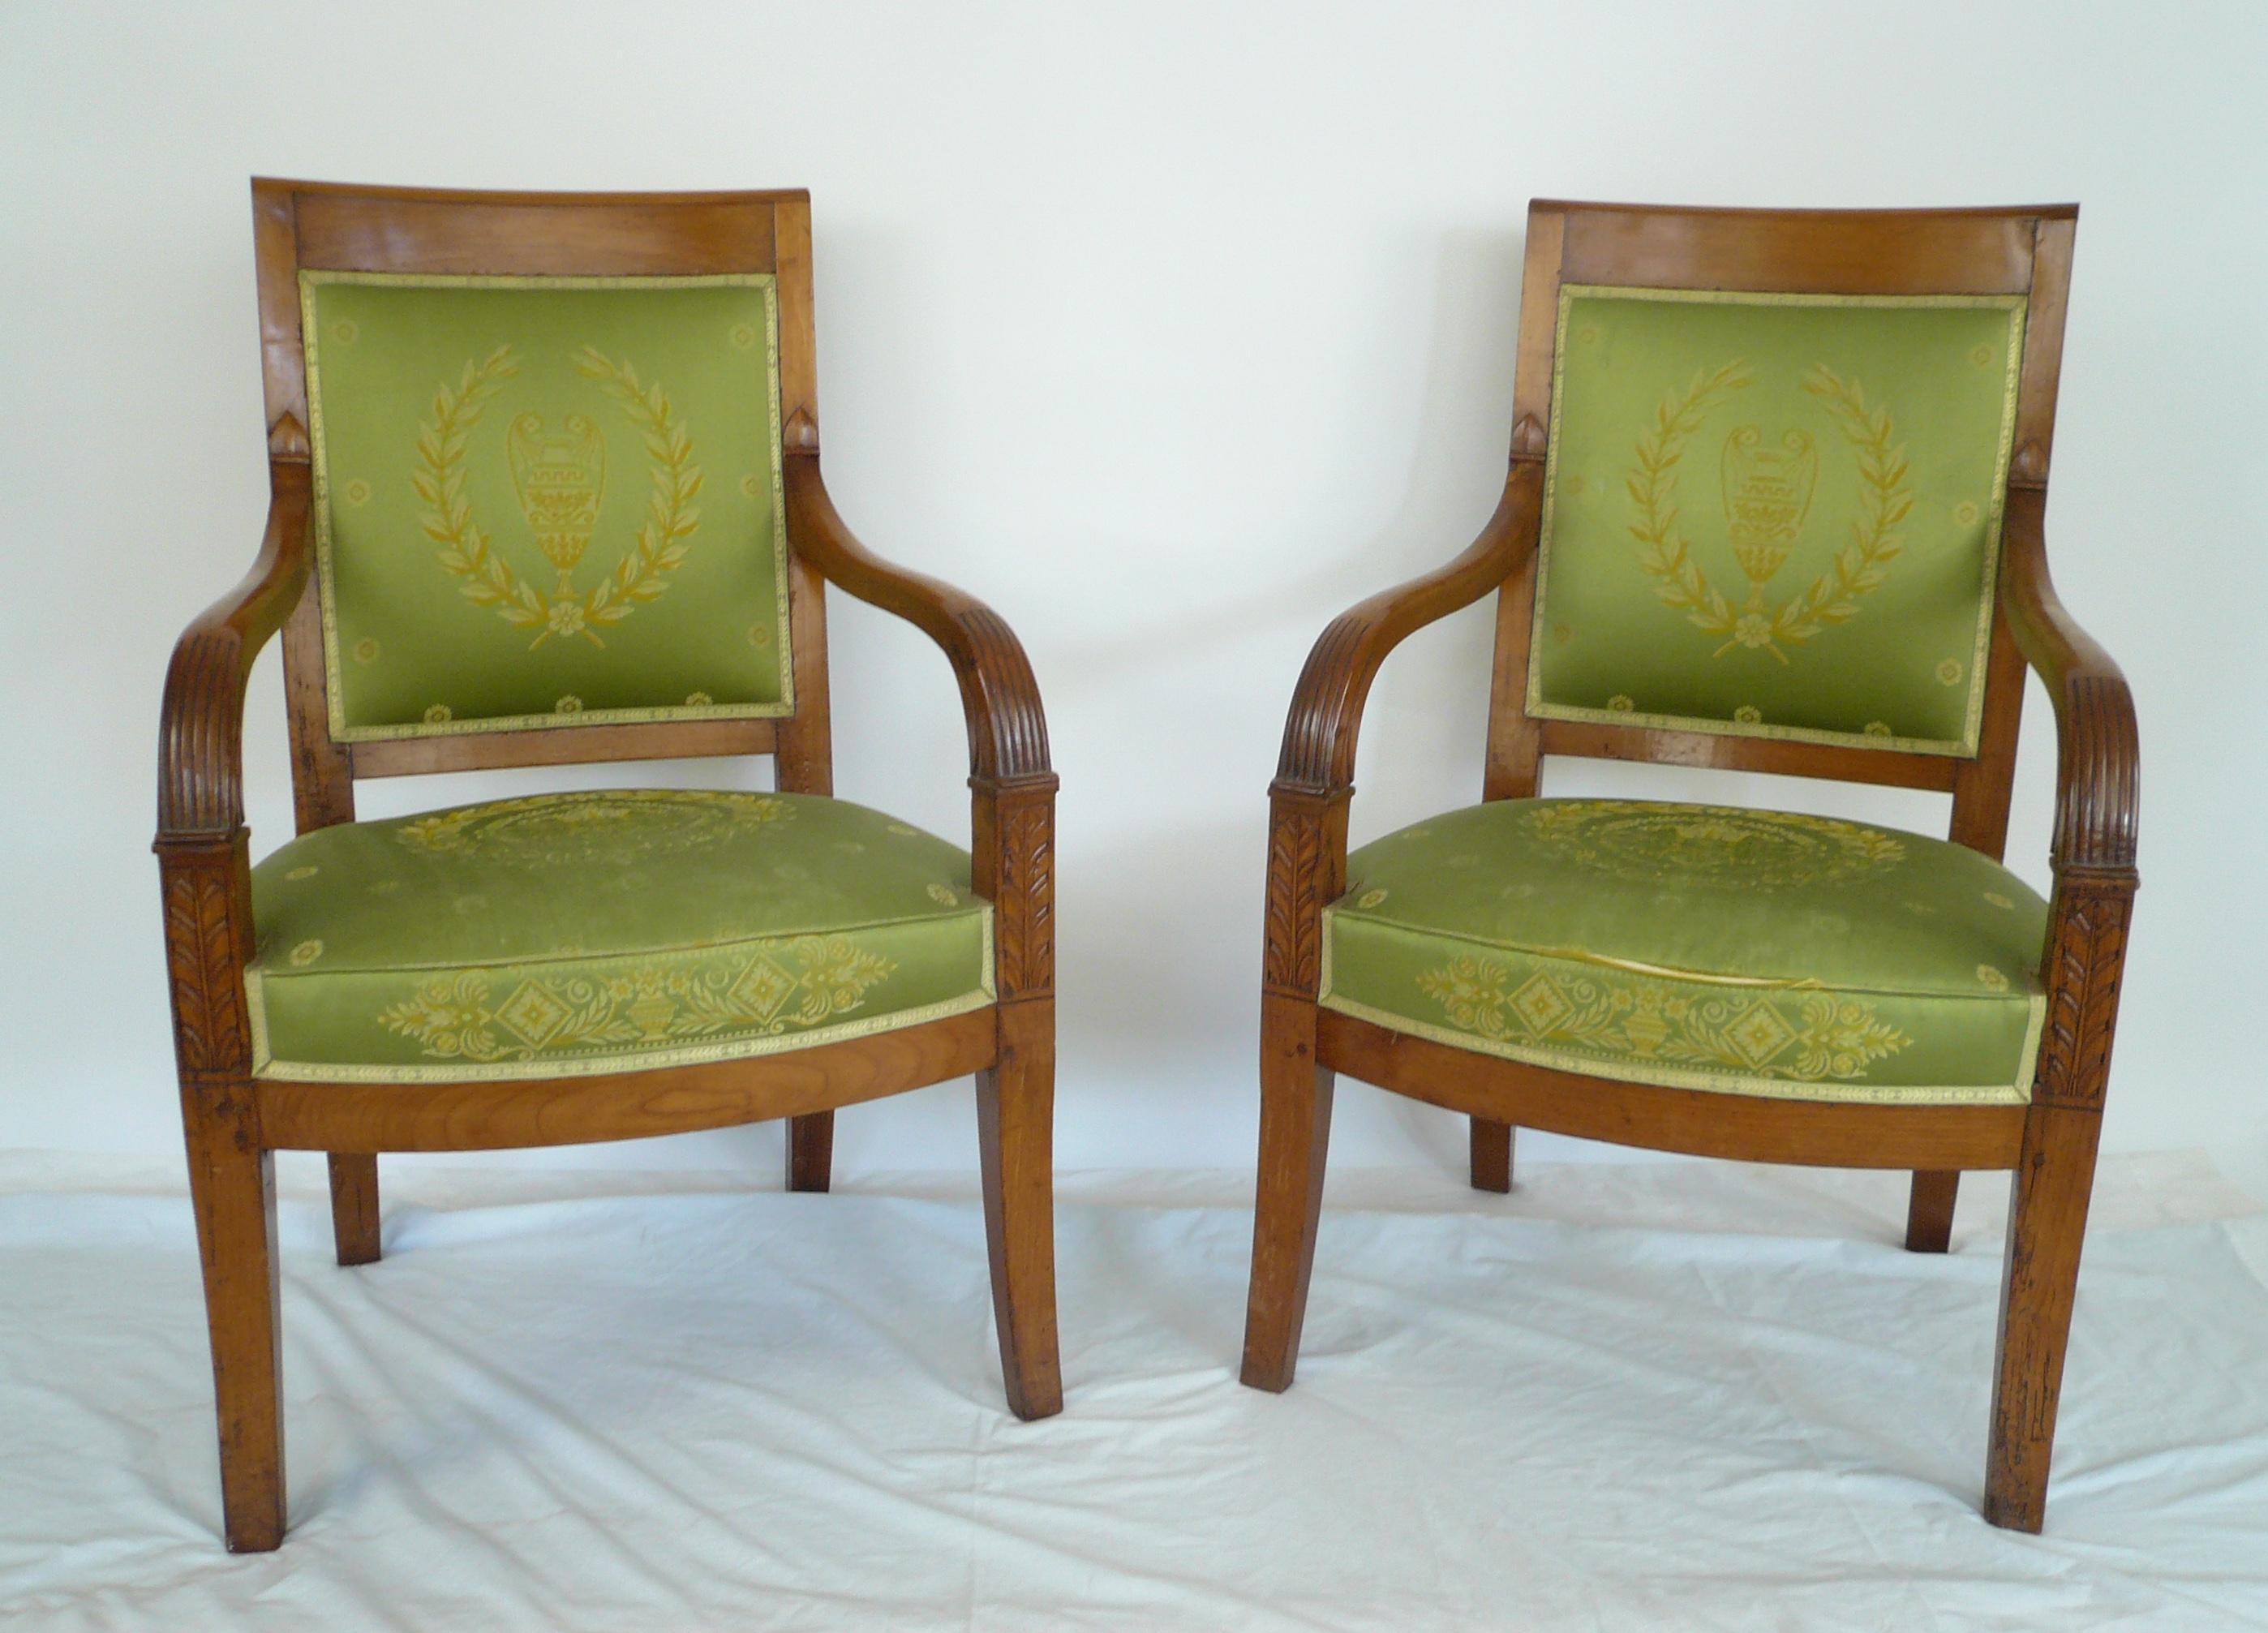 This pair of 19th century fruitwood armchairs feature carved acanthus leaves and reeded arms.